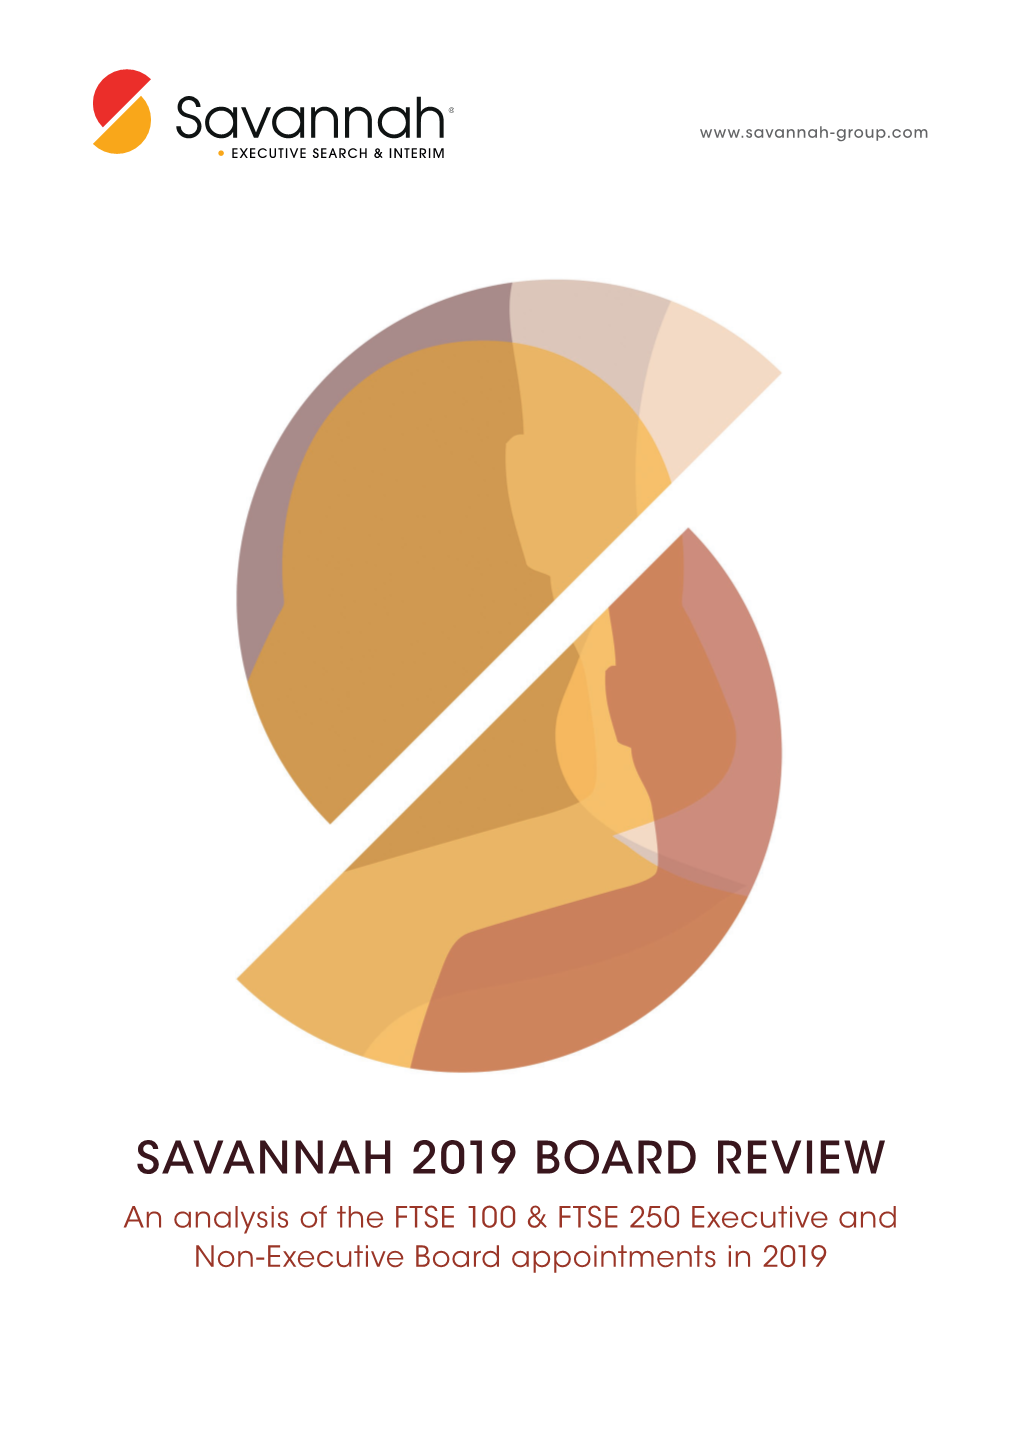 SAVANNAH 2019 BOARD REVIEW an Analysis of the FTSE 100 & FTSE 250 Executive and Non-Executive Board Appointments in 2019